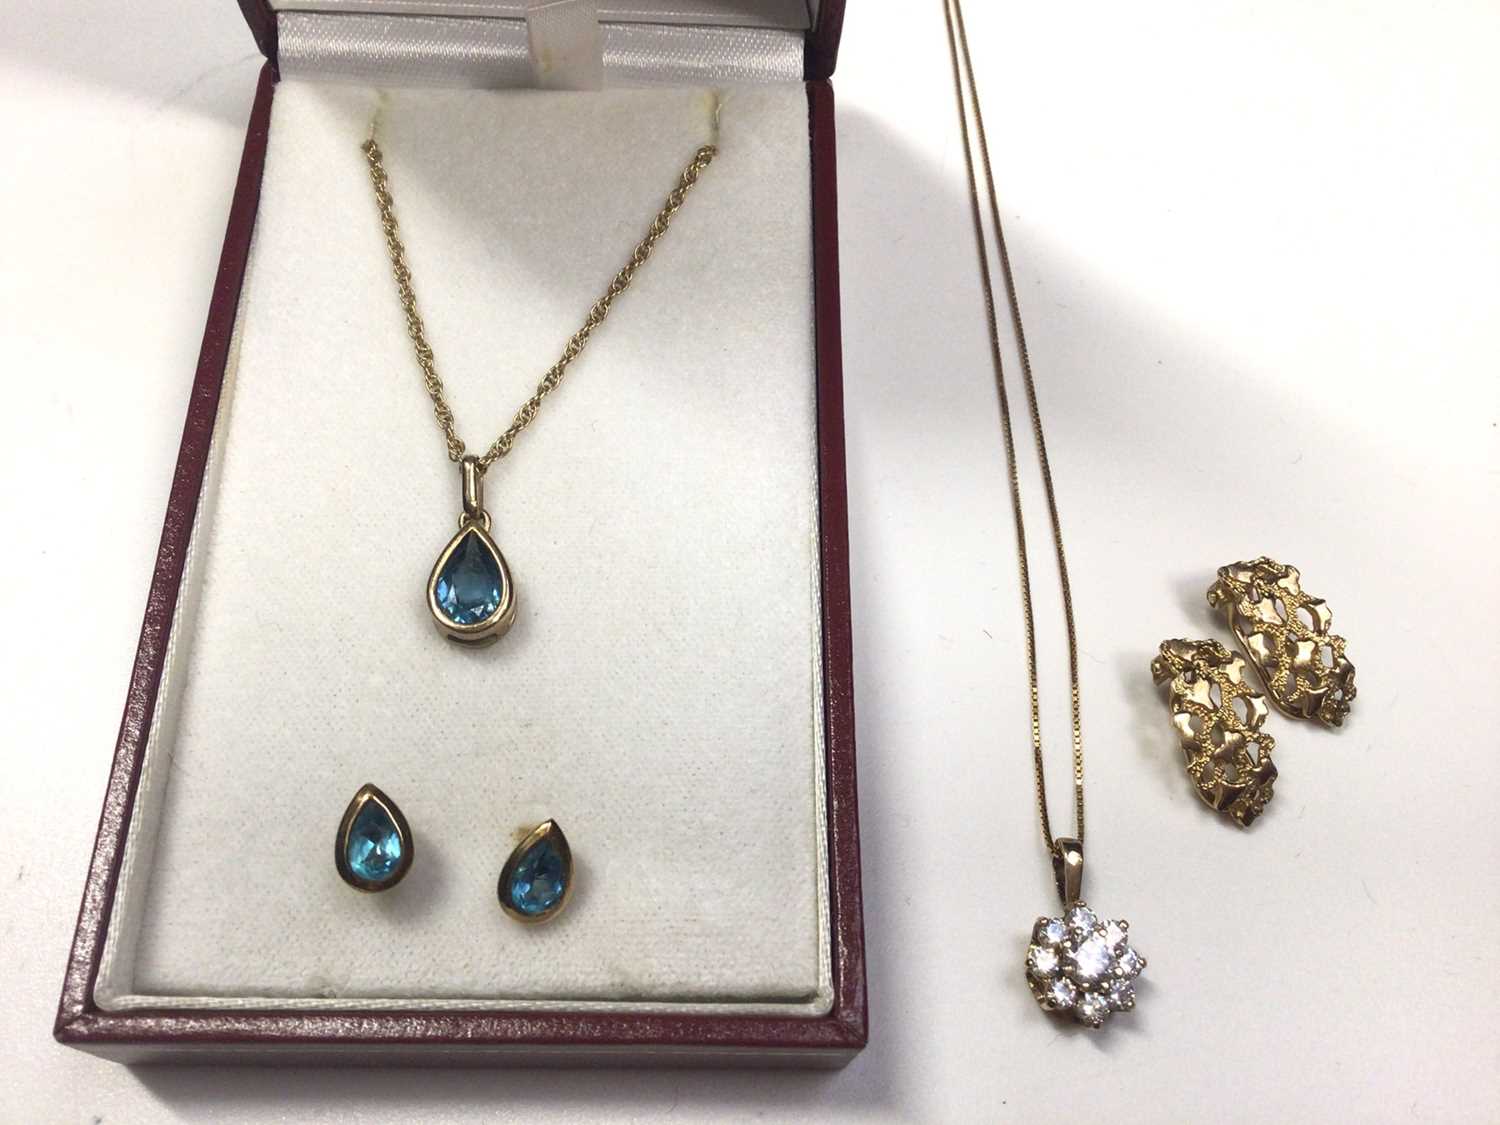 Lot 34 - 9ct gold pear shaped blue stone pendant on chain and matching pair of earrings, 9ct gold flower head pendant on chain and pair 9ct gold clip on earrings